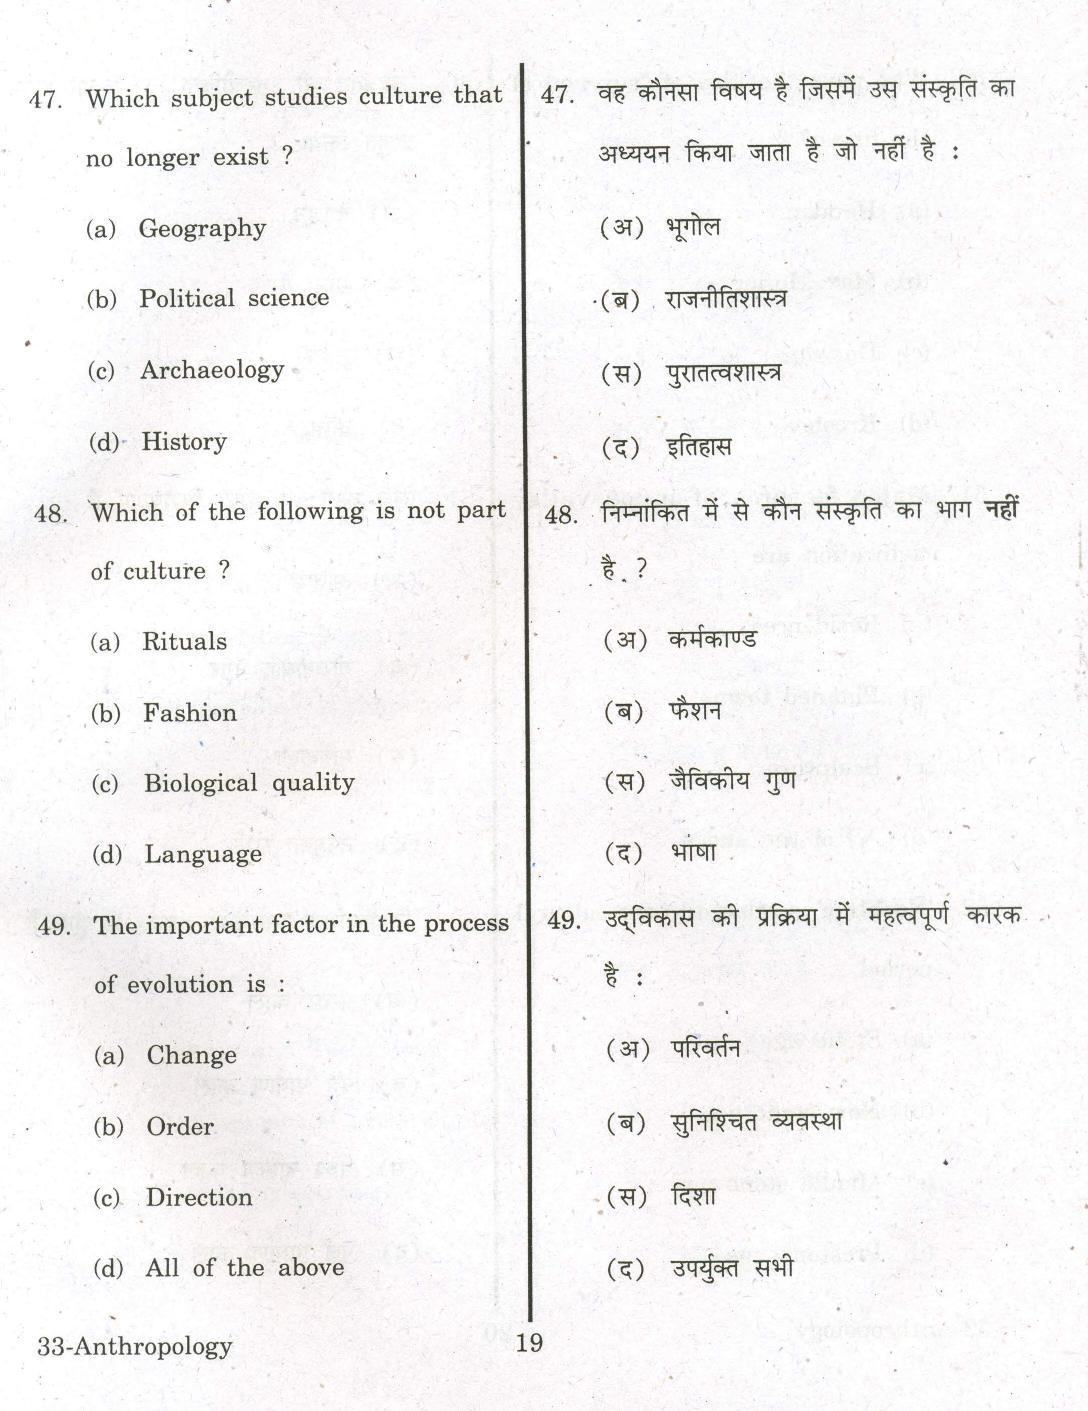 URATPG Anthropology 2013 Question Paper - Page 18